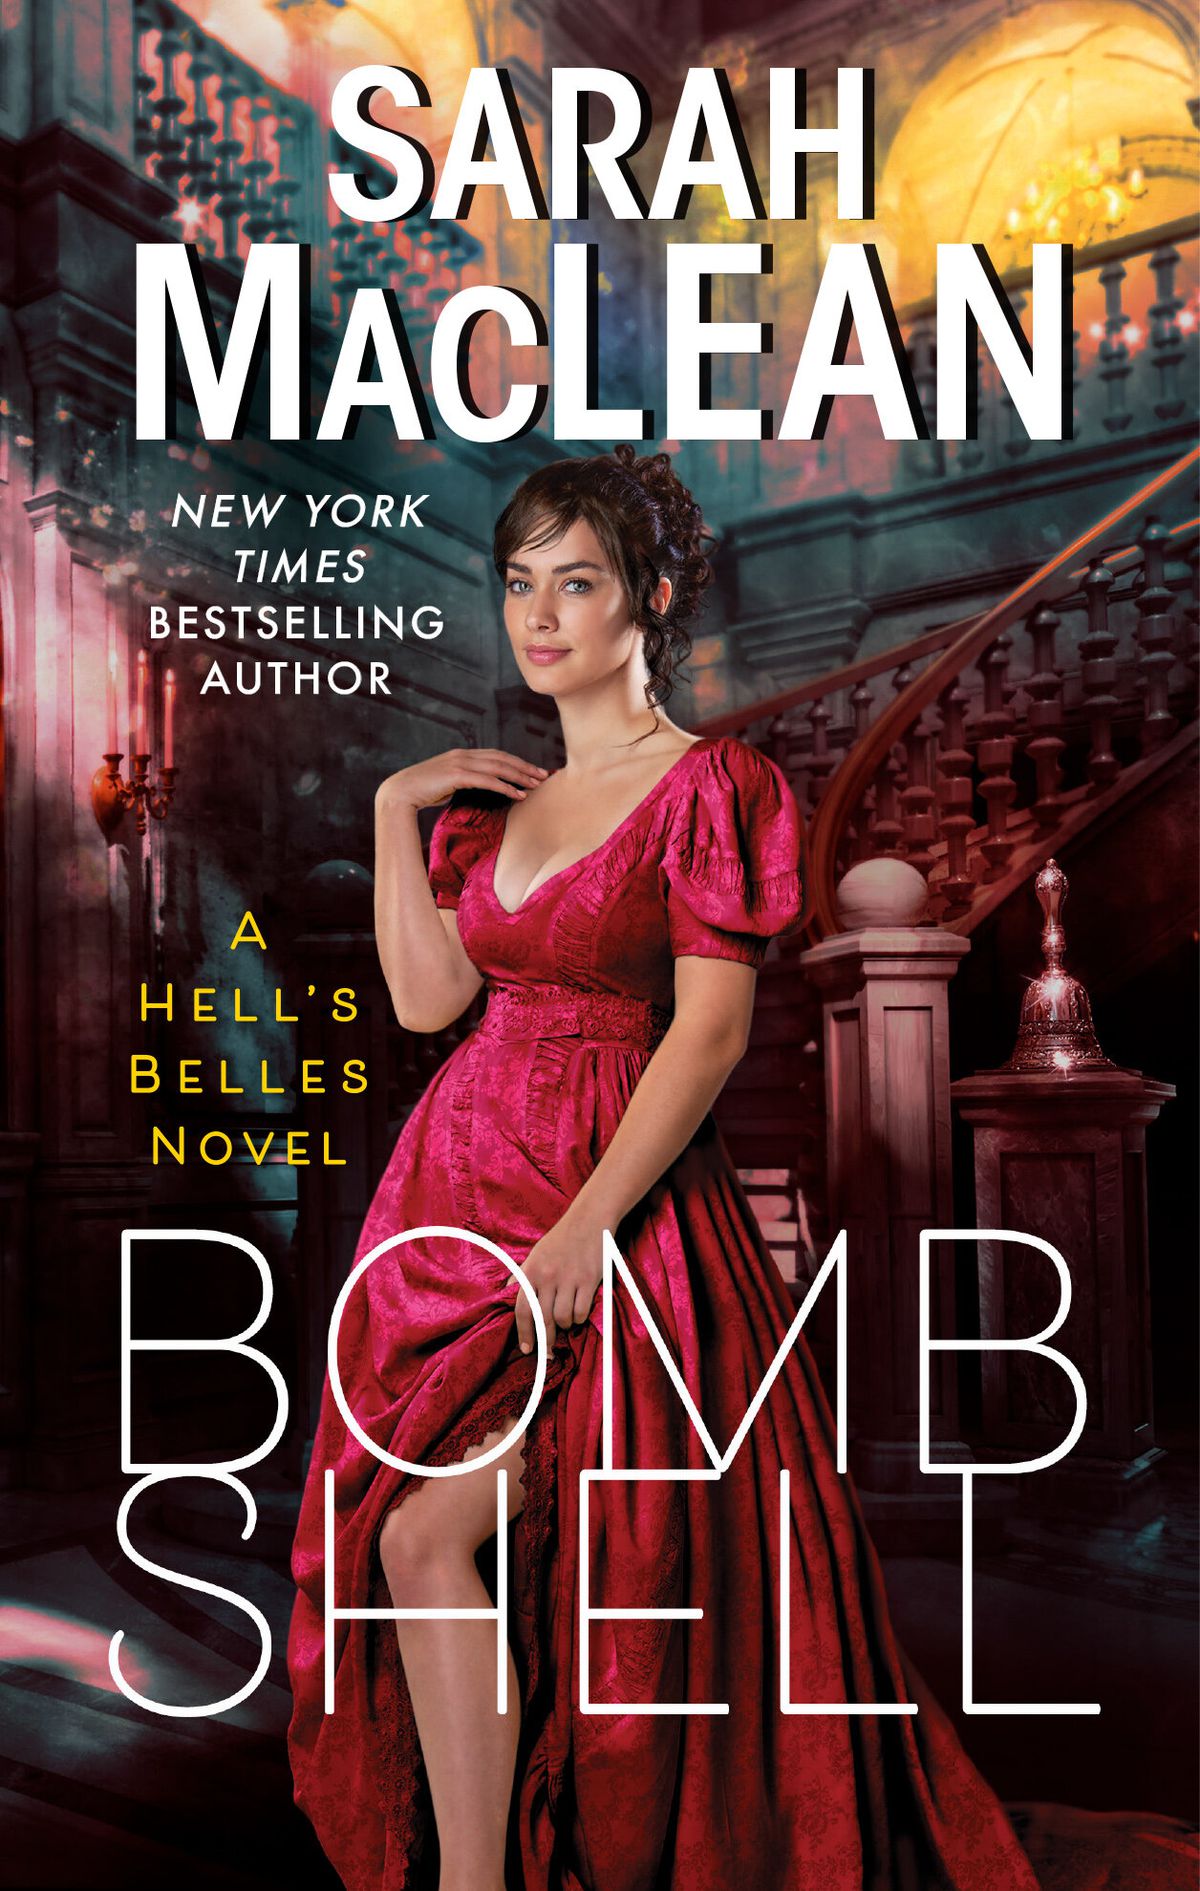 Cover art of Bombshell, with a woman in a red dress standing at the base of a staircase